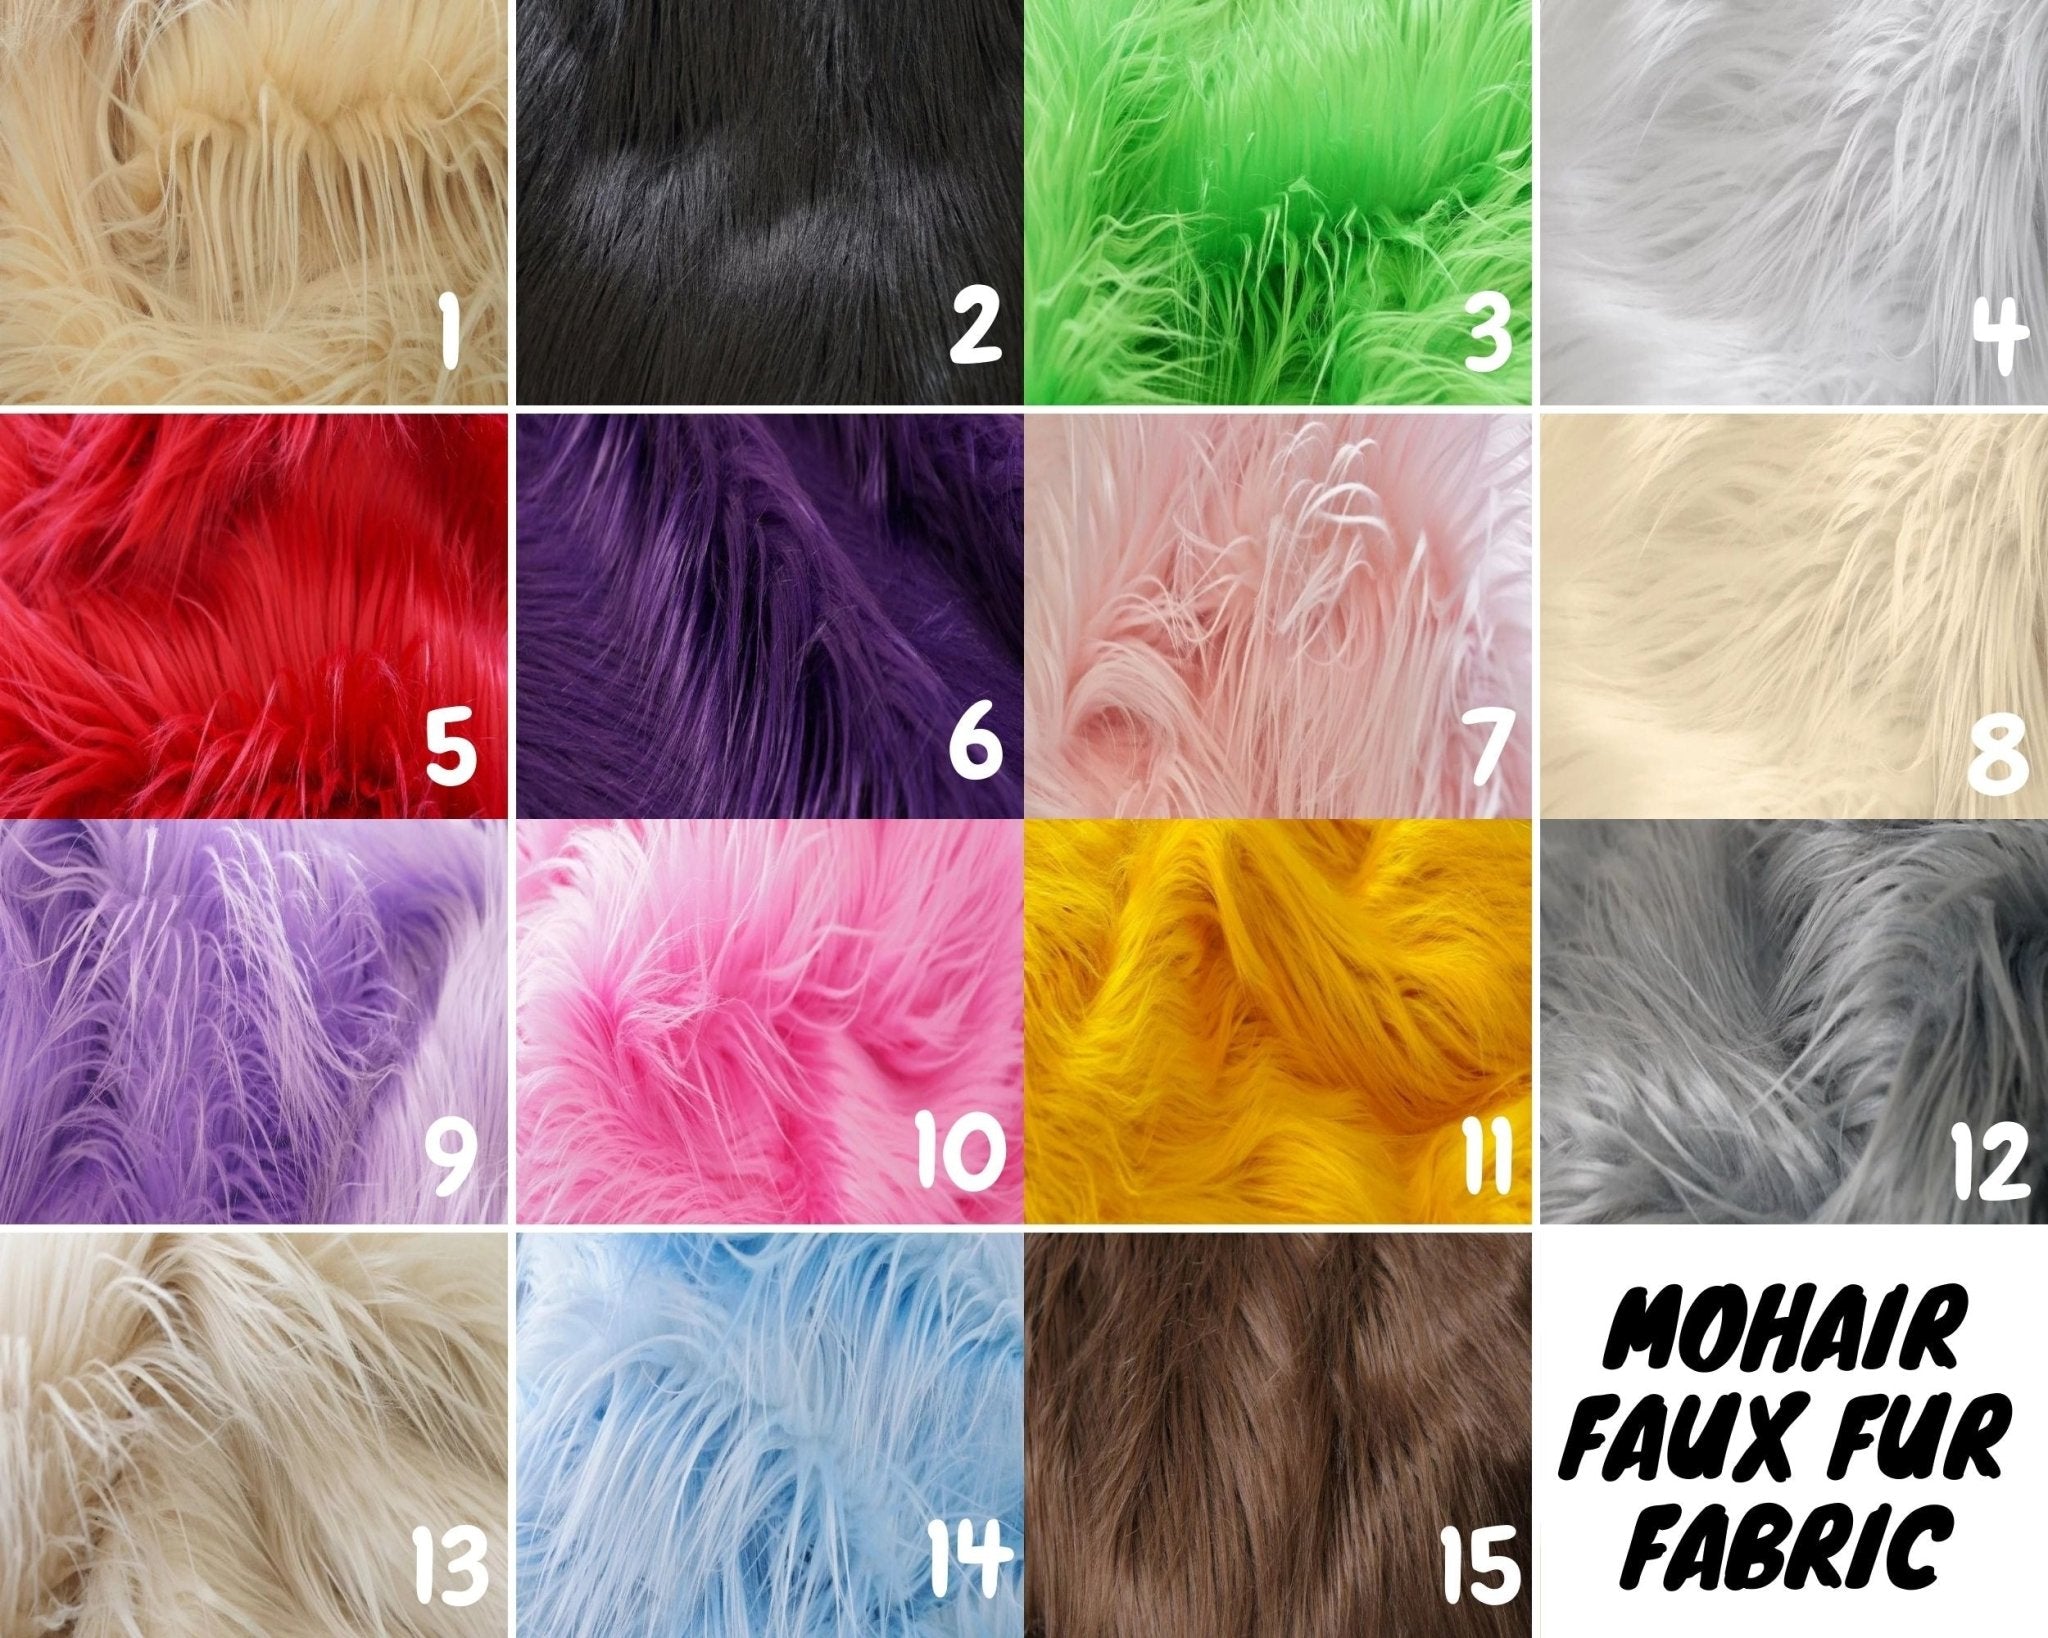 Mohair Faux Fur Fabric By The Roll (20 Yards) 4 Inch Pile